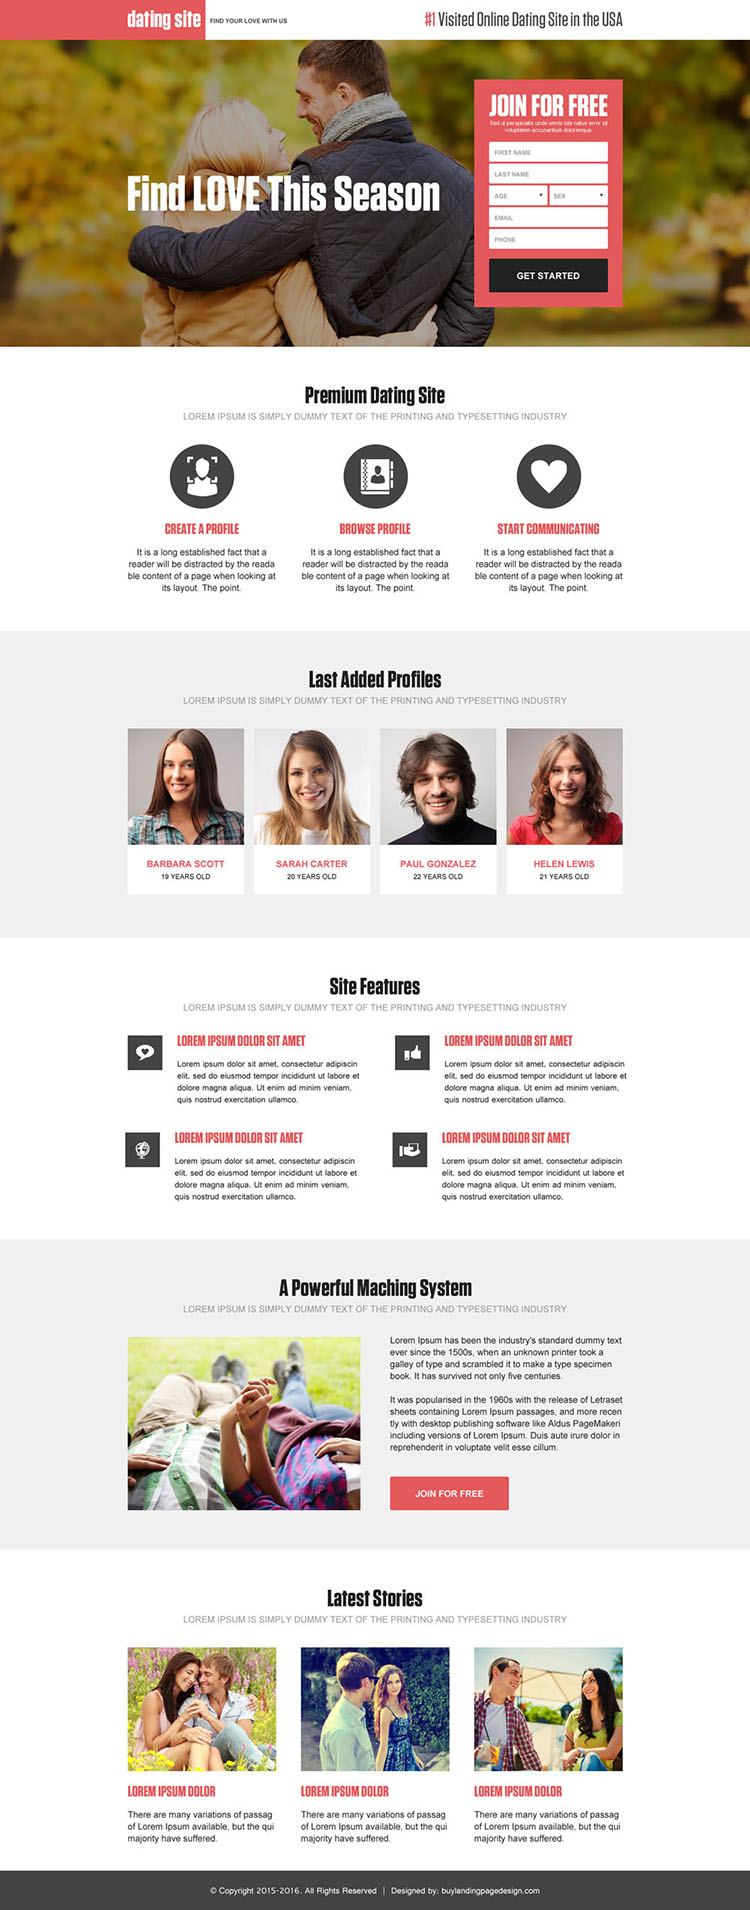 online dating in usa responsive lead capture landing page